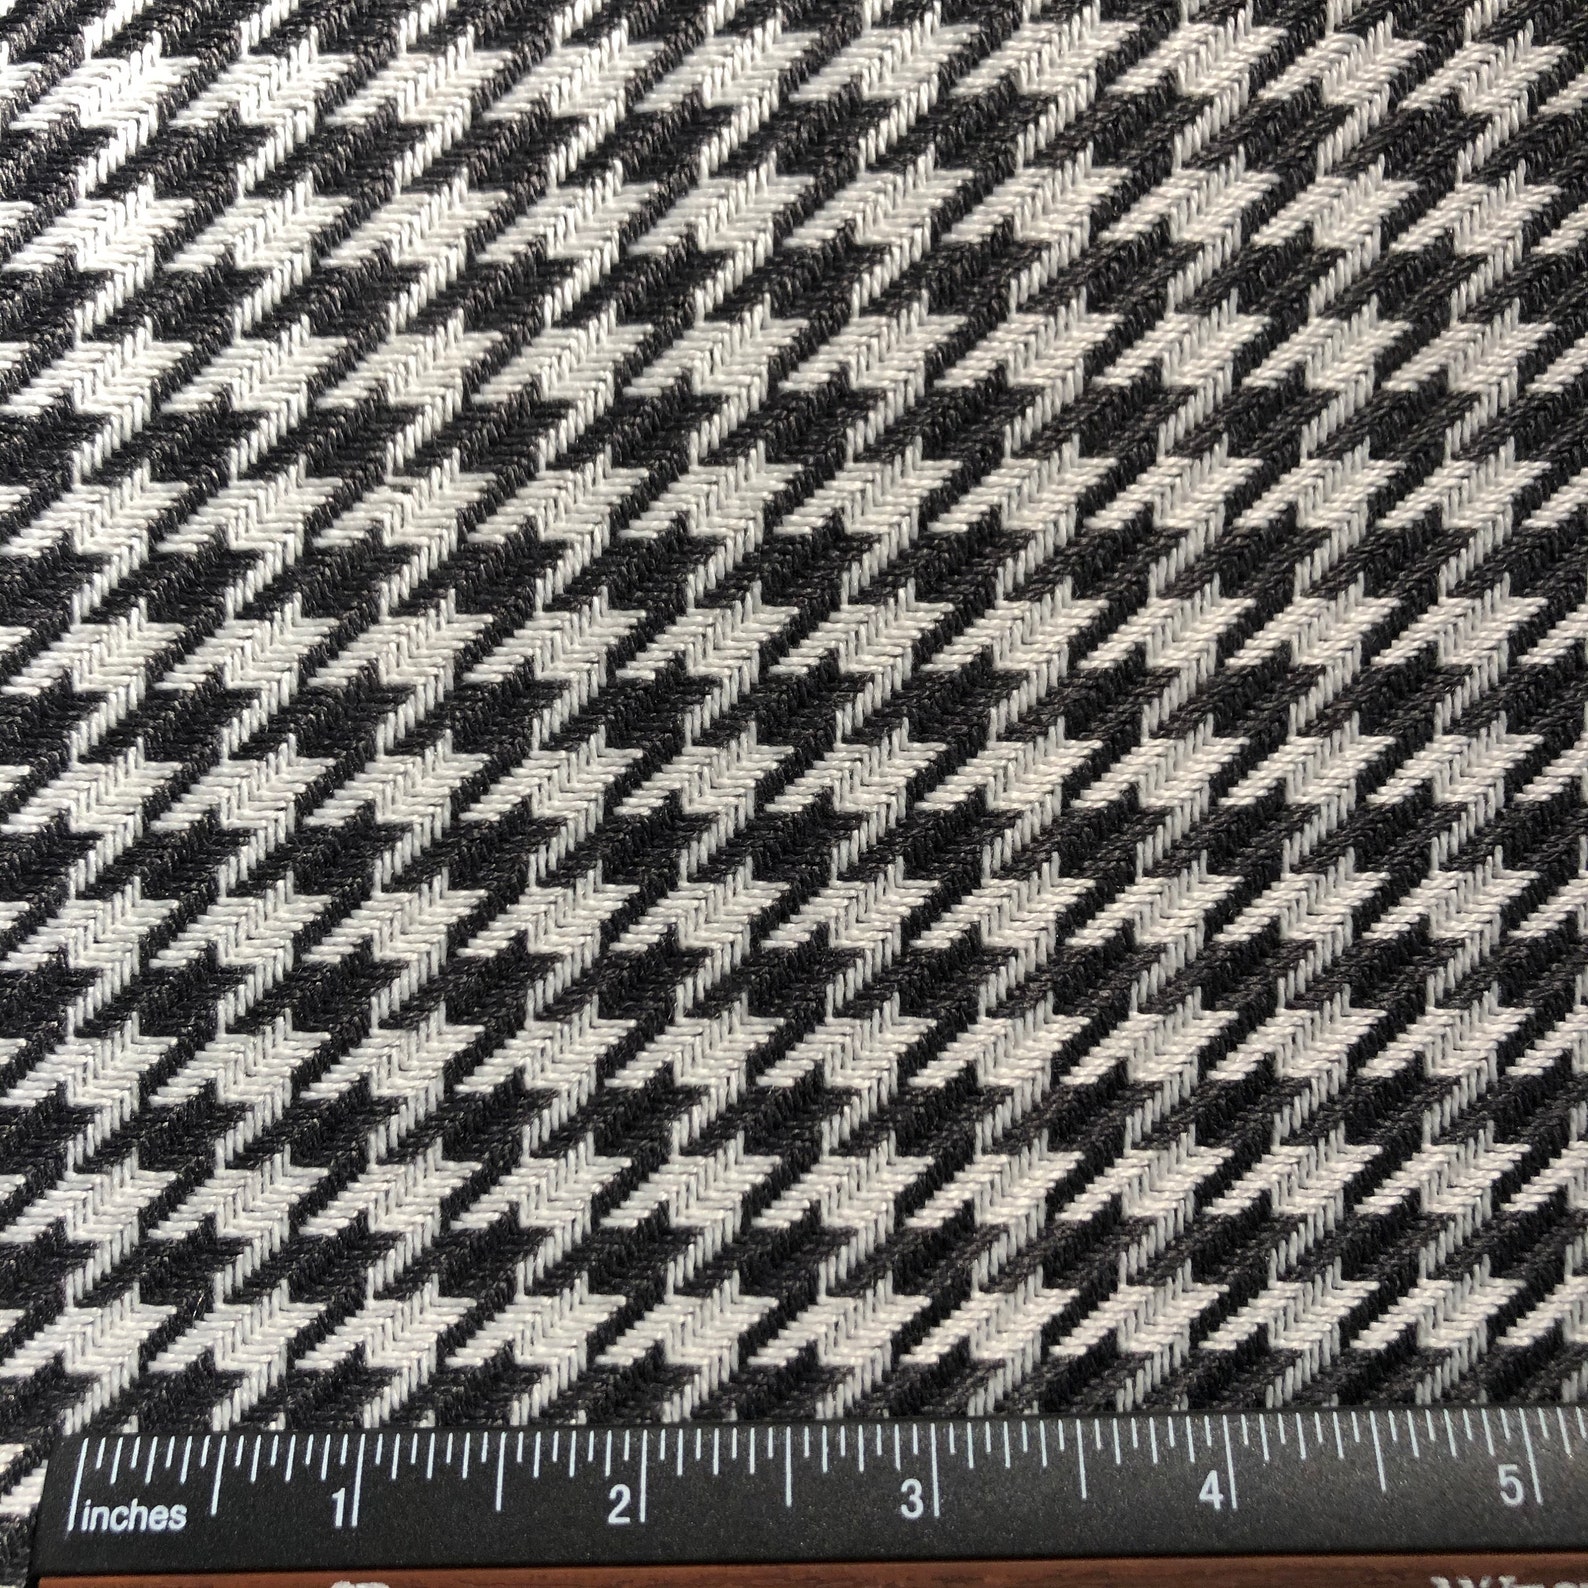 Woven houndstooth fabric heavy duty thick upholstery fabric in | Etsy